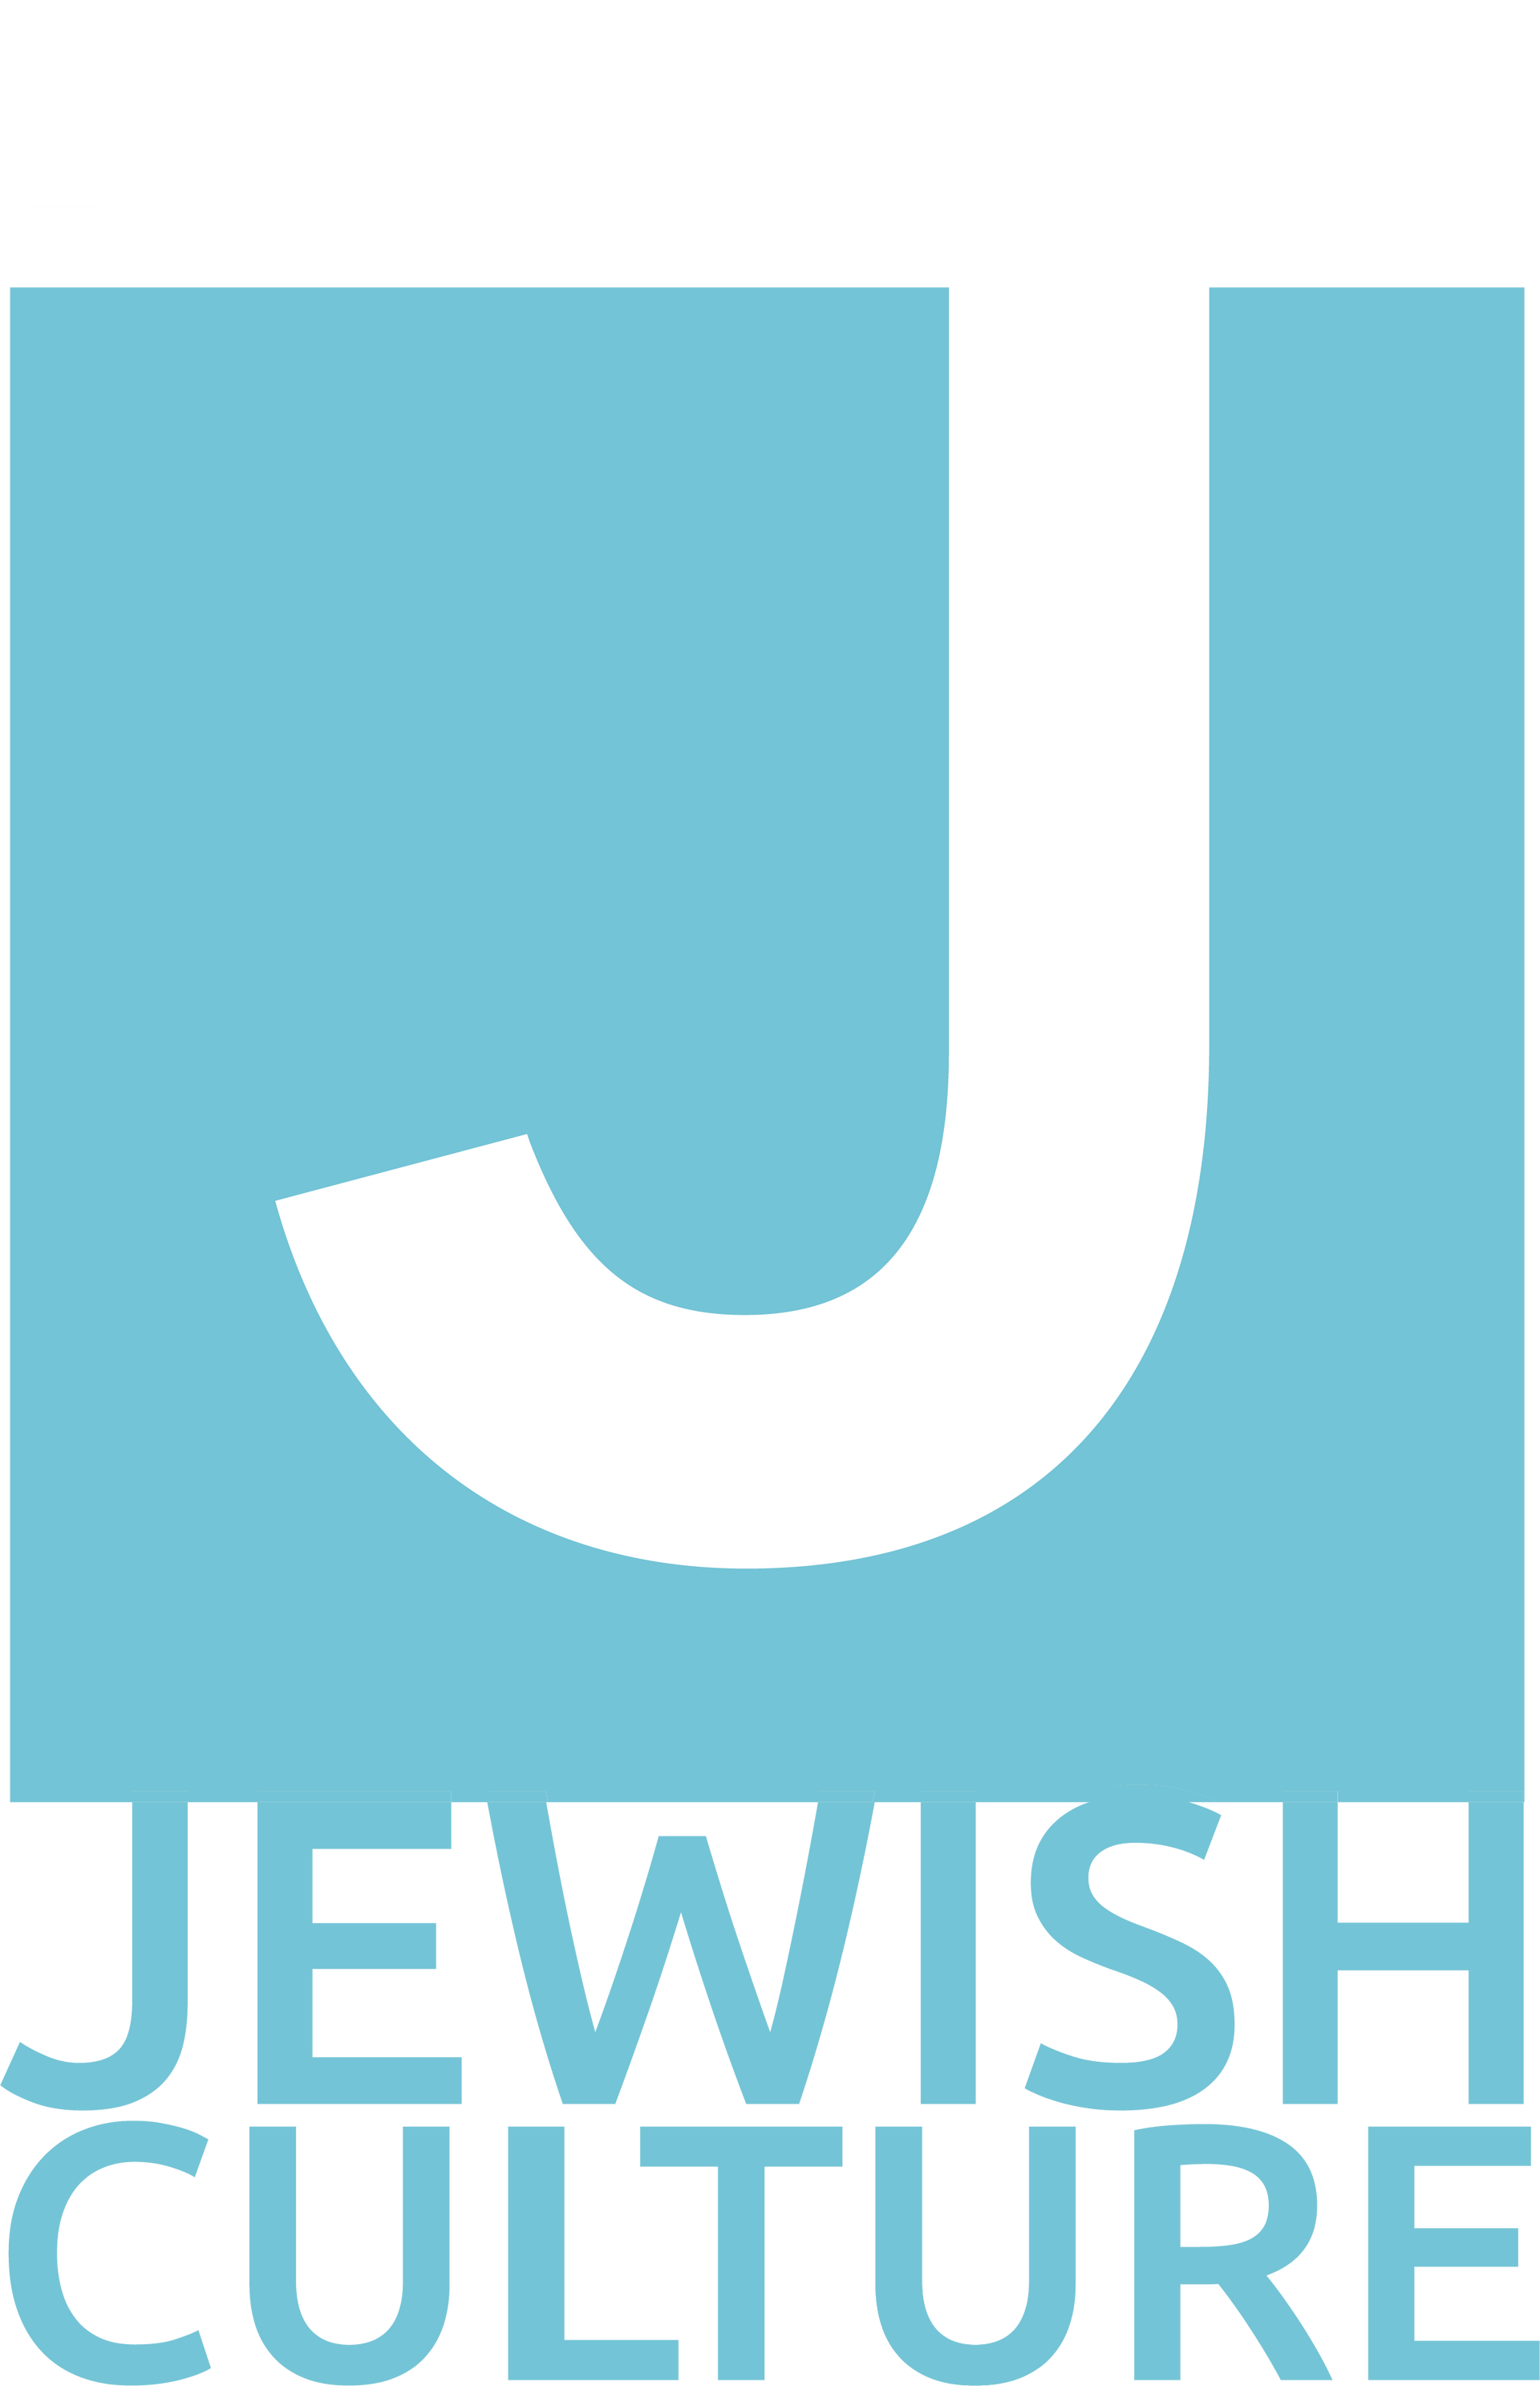 Logo for JCC on a blue square with a white letter j in the middle.